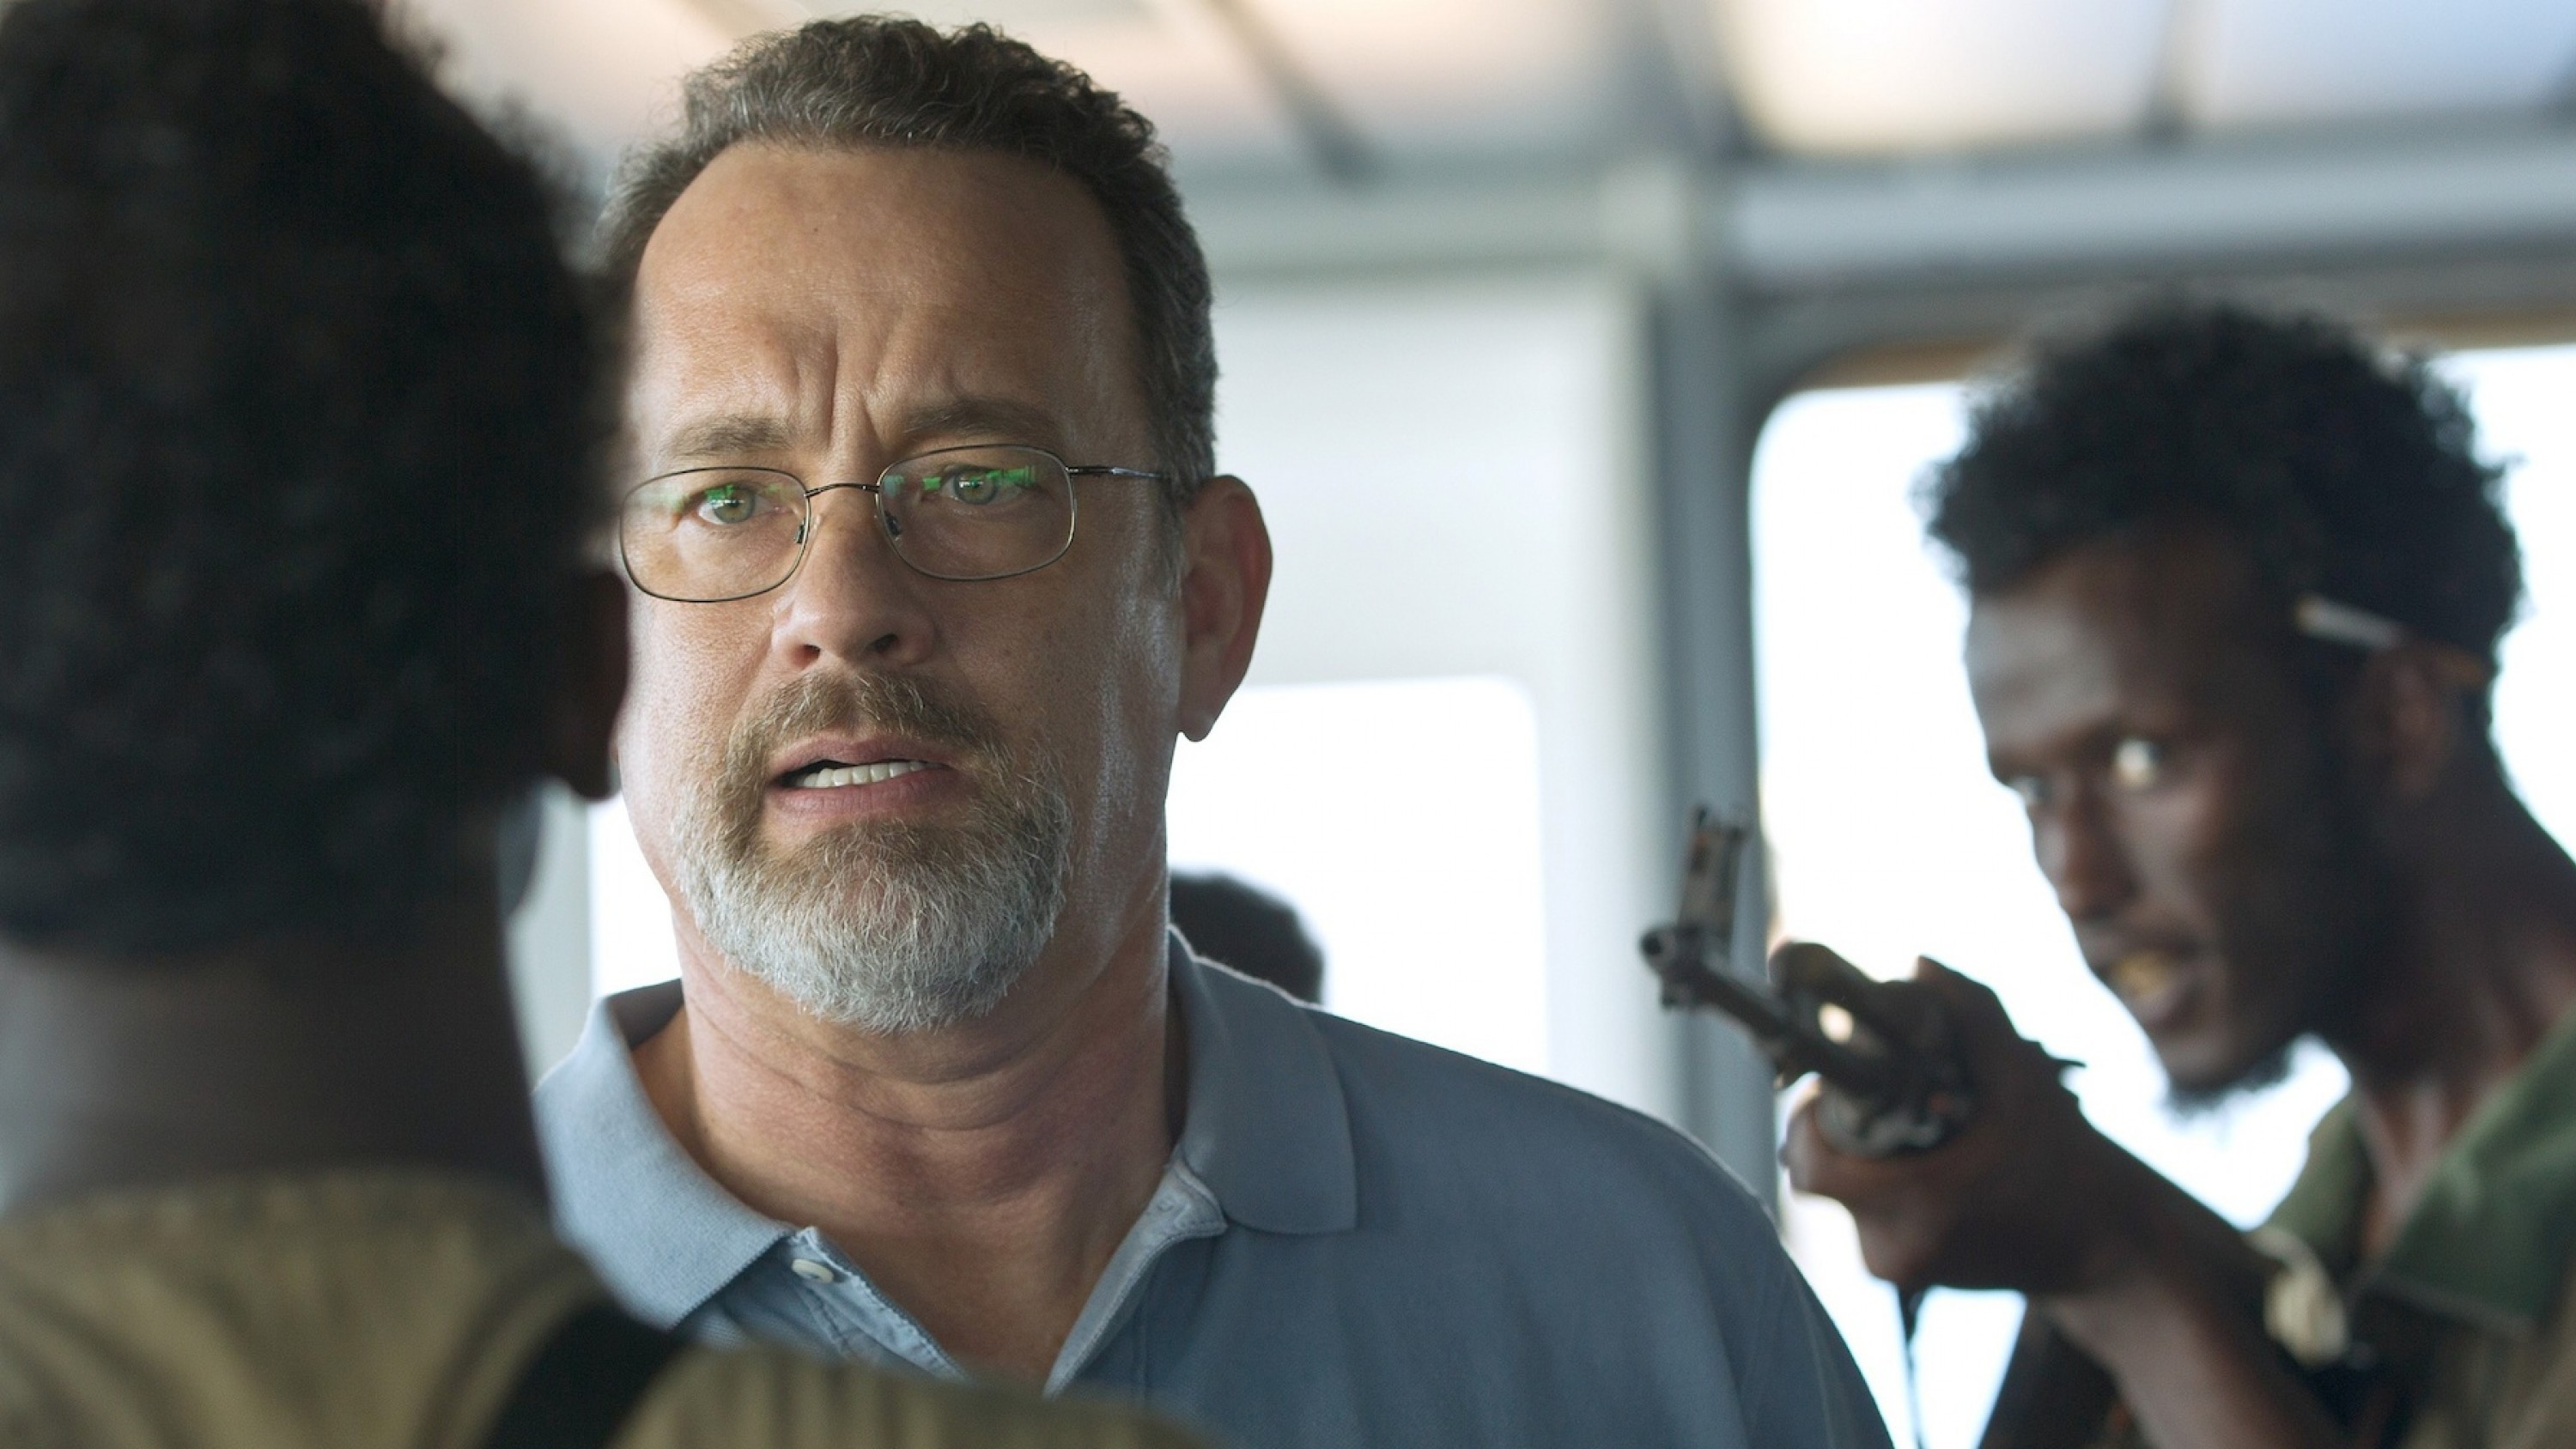 The Scary True Story Behind Captain Phillips, Explained